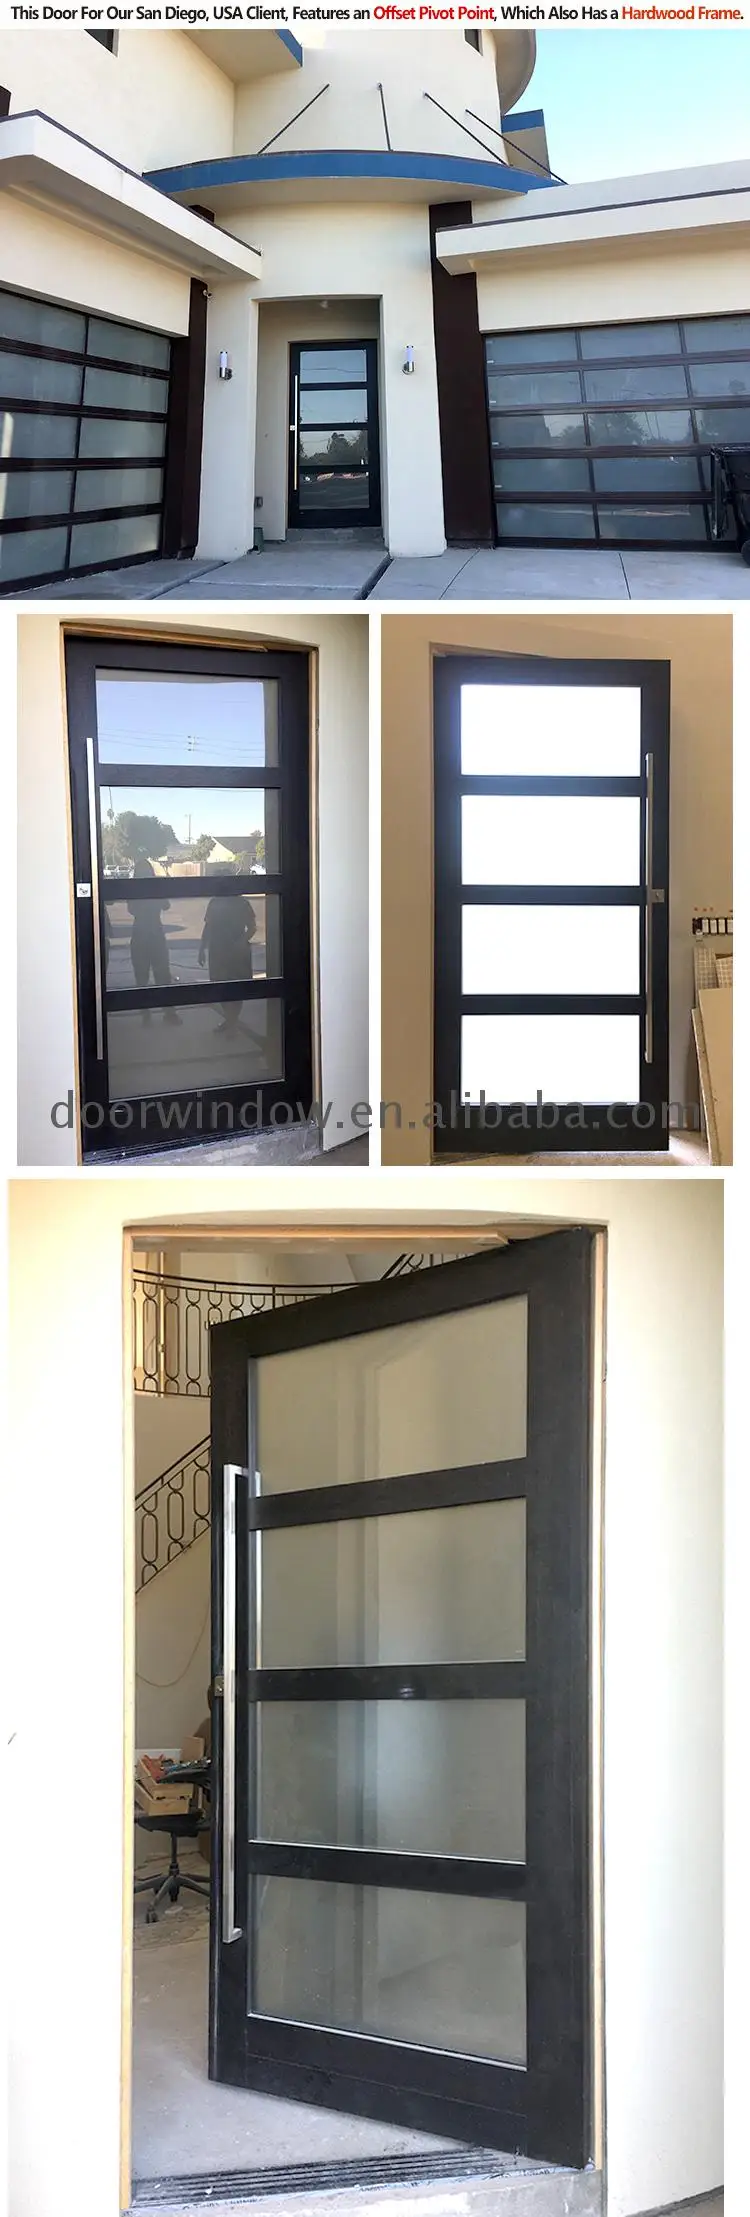 Double swing door fixed glass leaf with tempered glazed casement